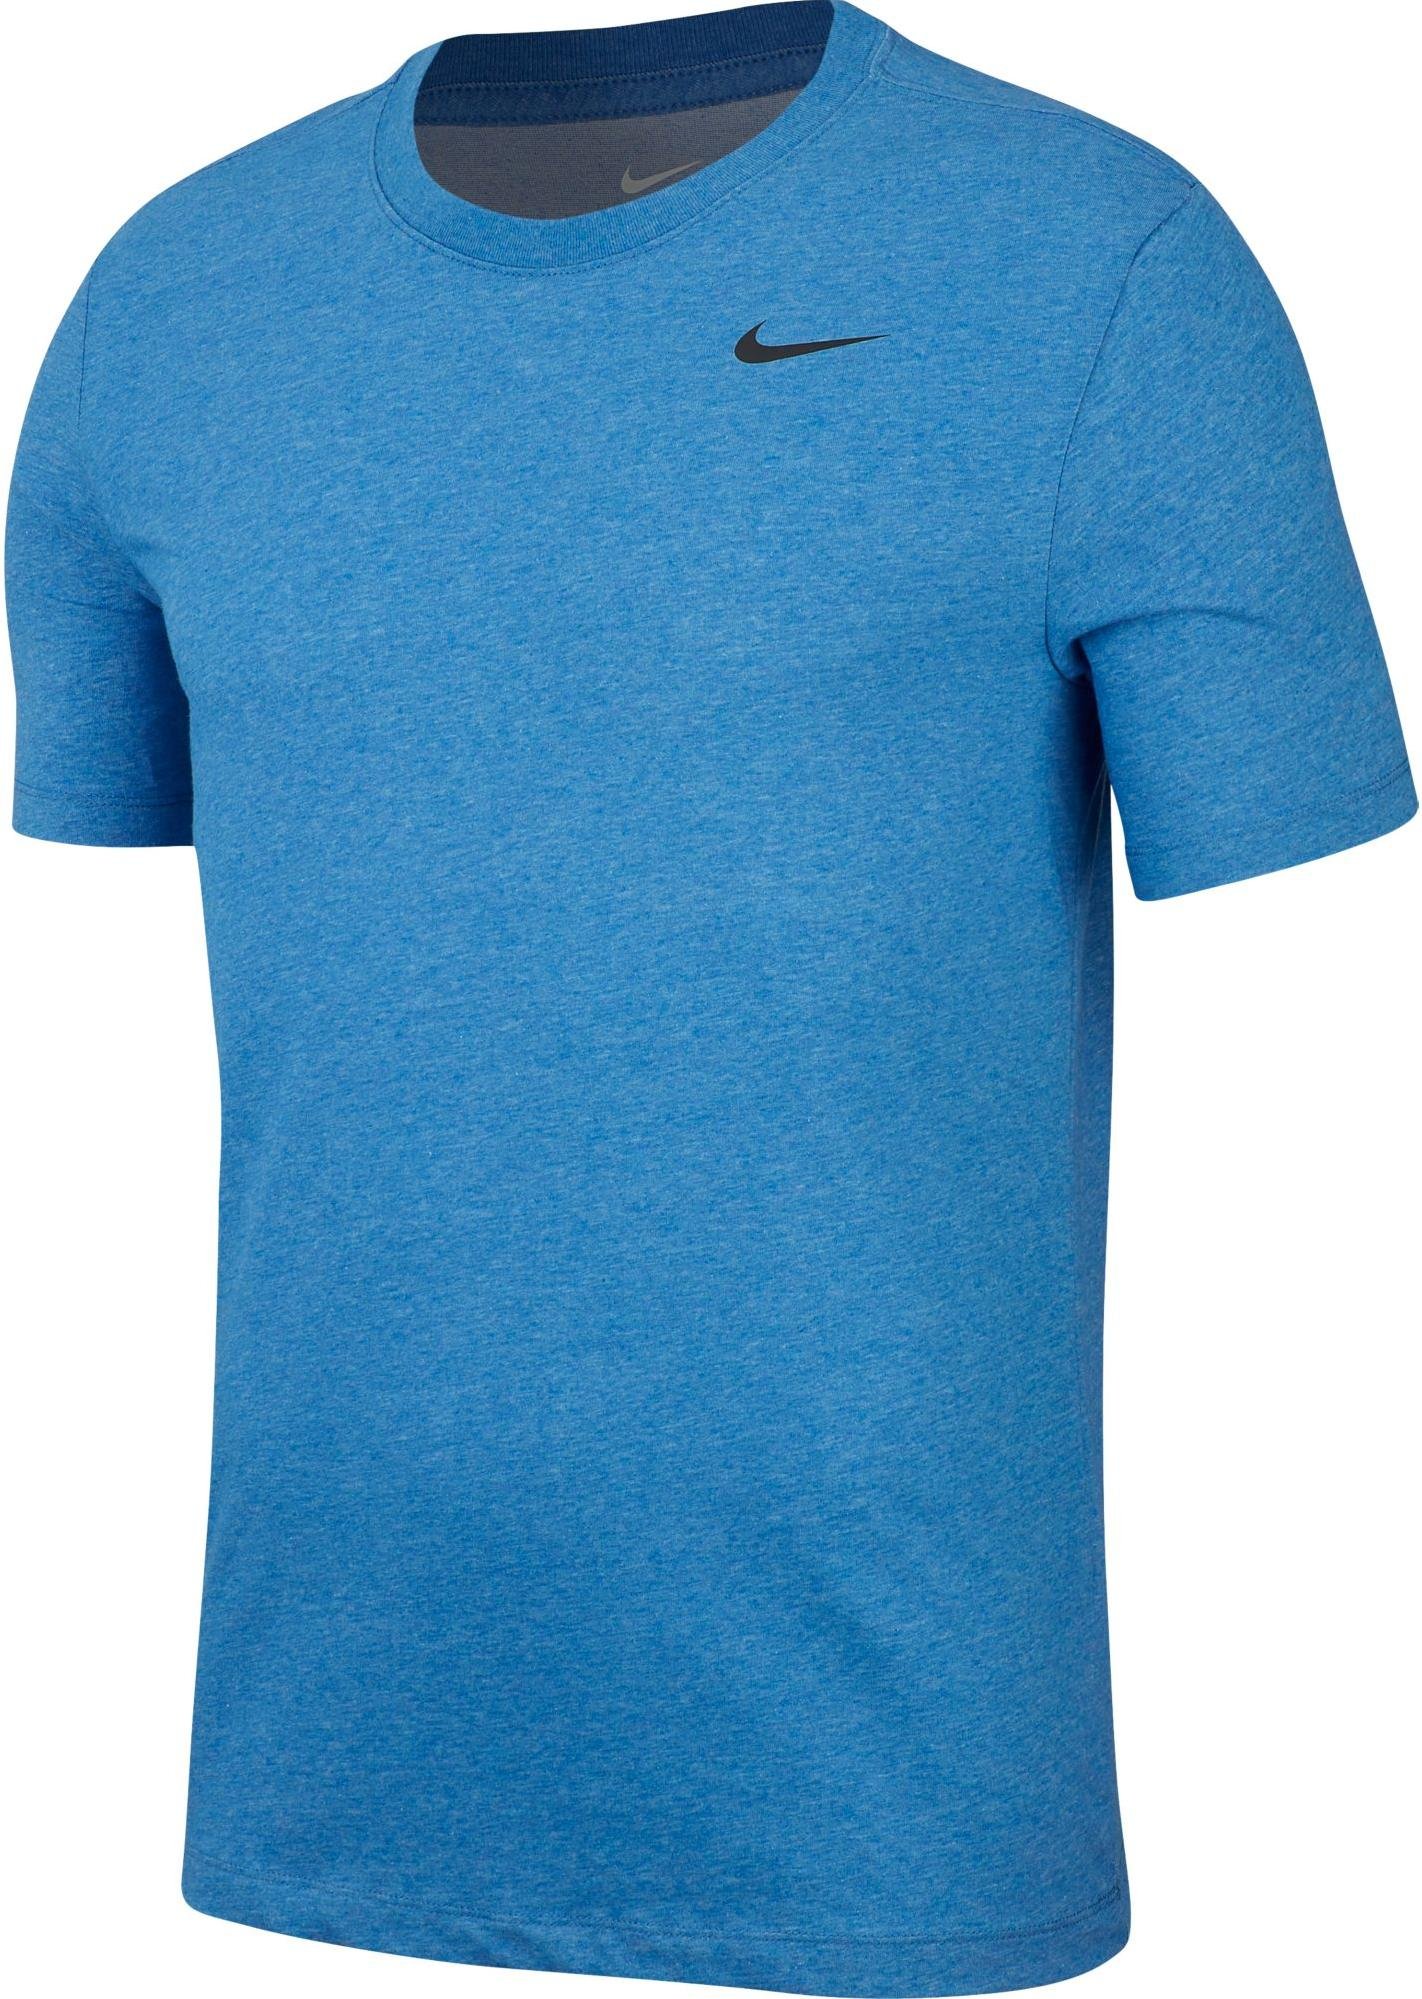 T-shirt Nike M NK DRY TEE DFC CREW SOLID